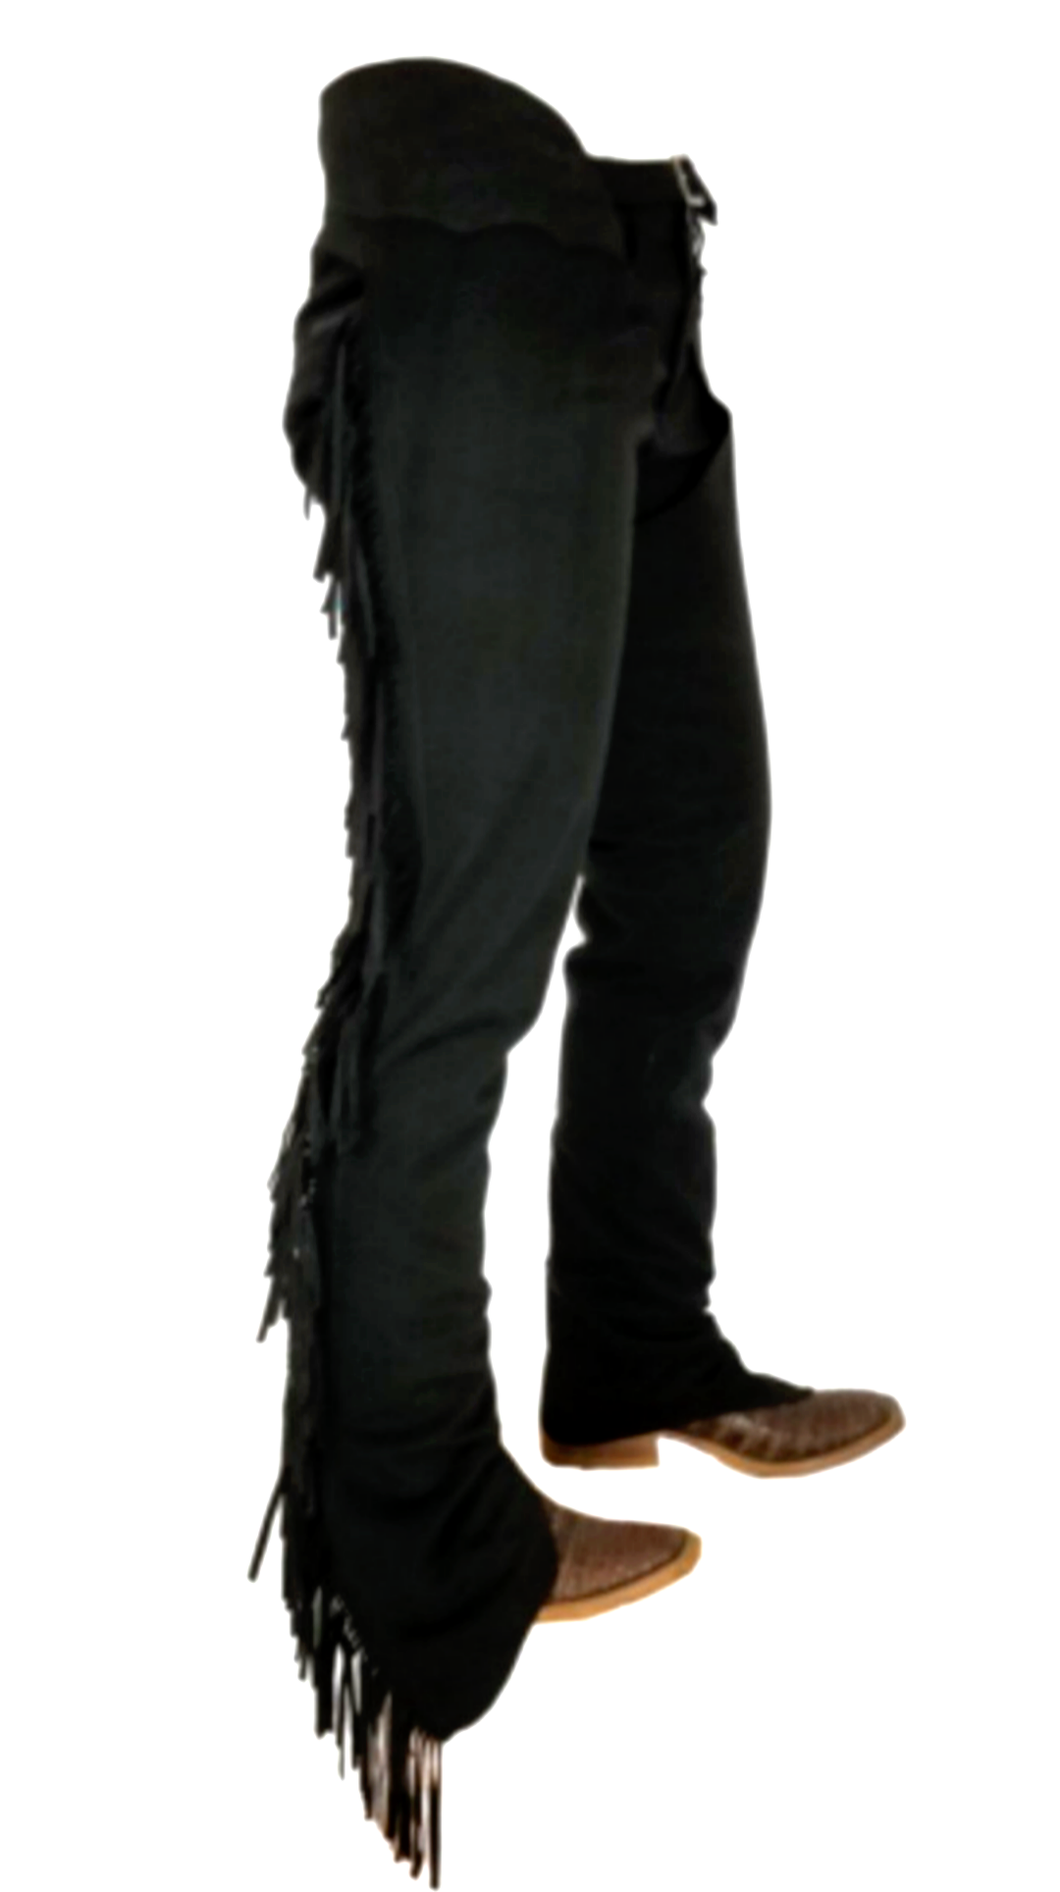 Longs!!!! BLACK SUEDE CHAPS WITH A STRETCH PANEL longer length